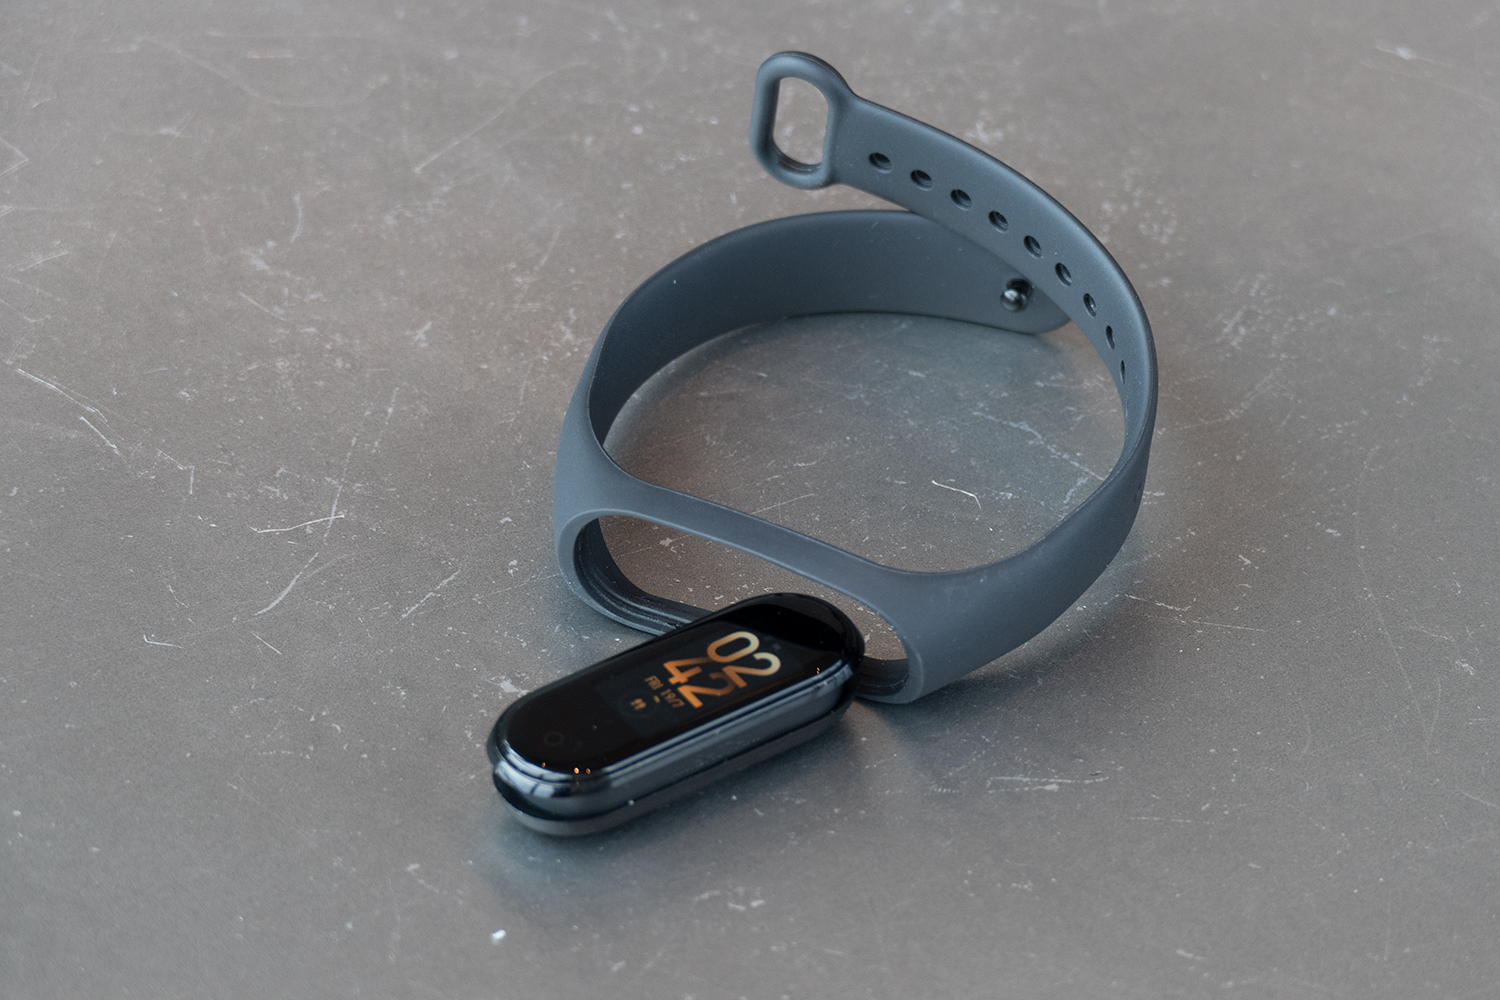 Xiaomi Mi Smart Band 4 unveiled, and it could be a Fitbit Charge killer